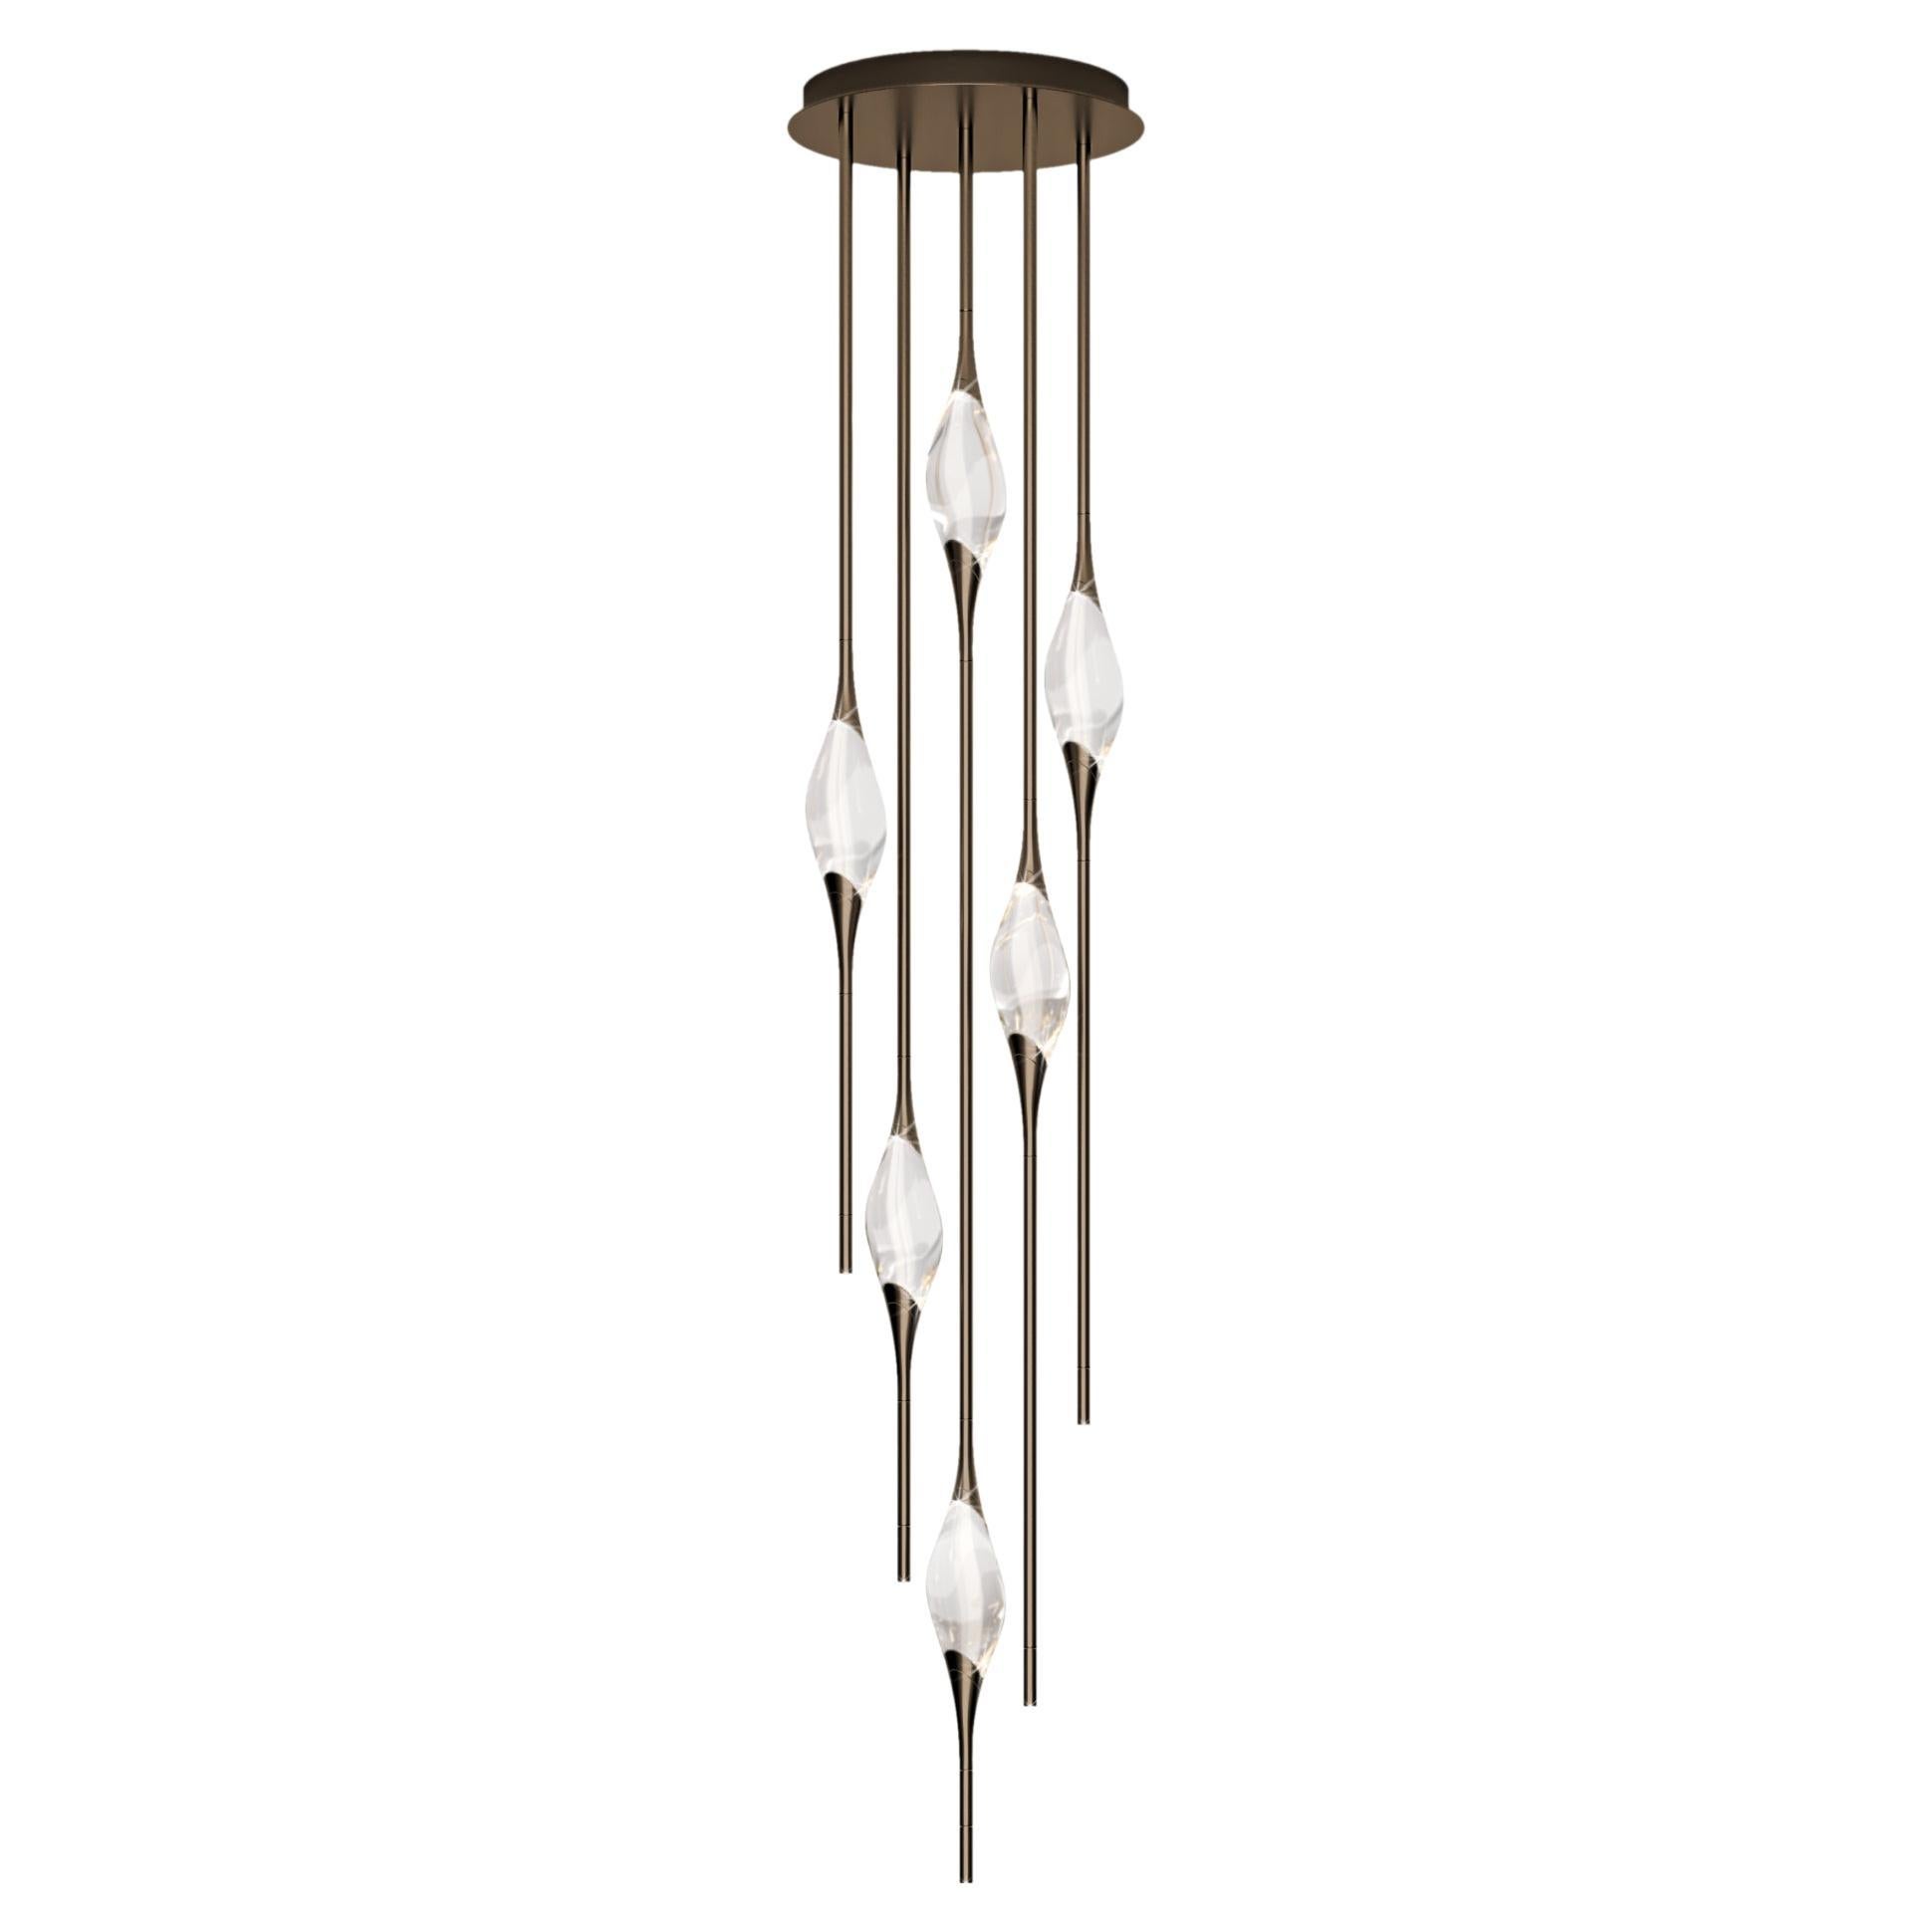 "Il Pezzo 12 Cluster Chandelier" - height 200cm/78.7" - bronze - crystal - LEDs